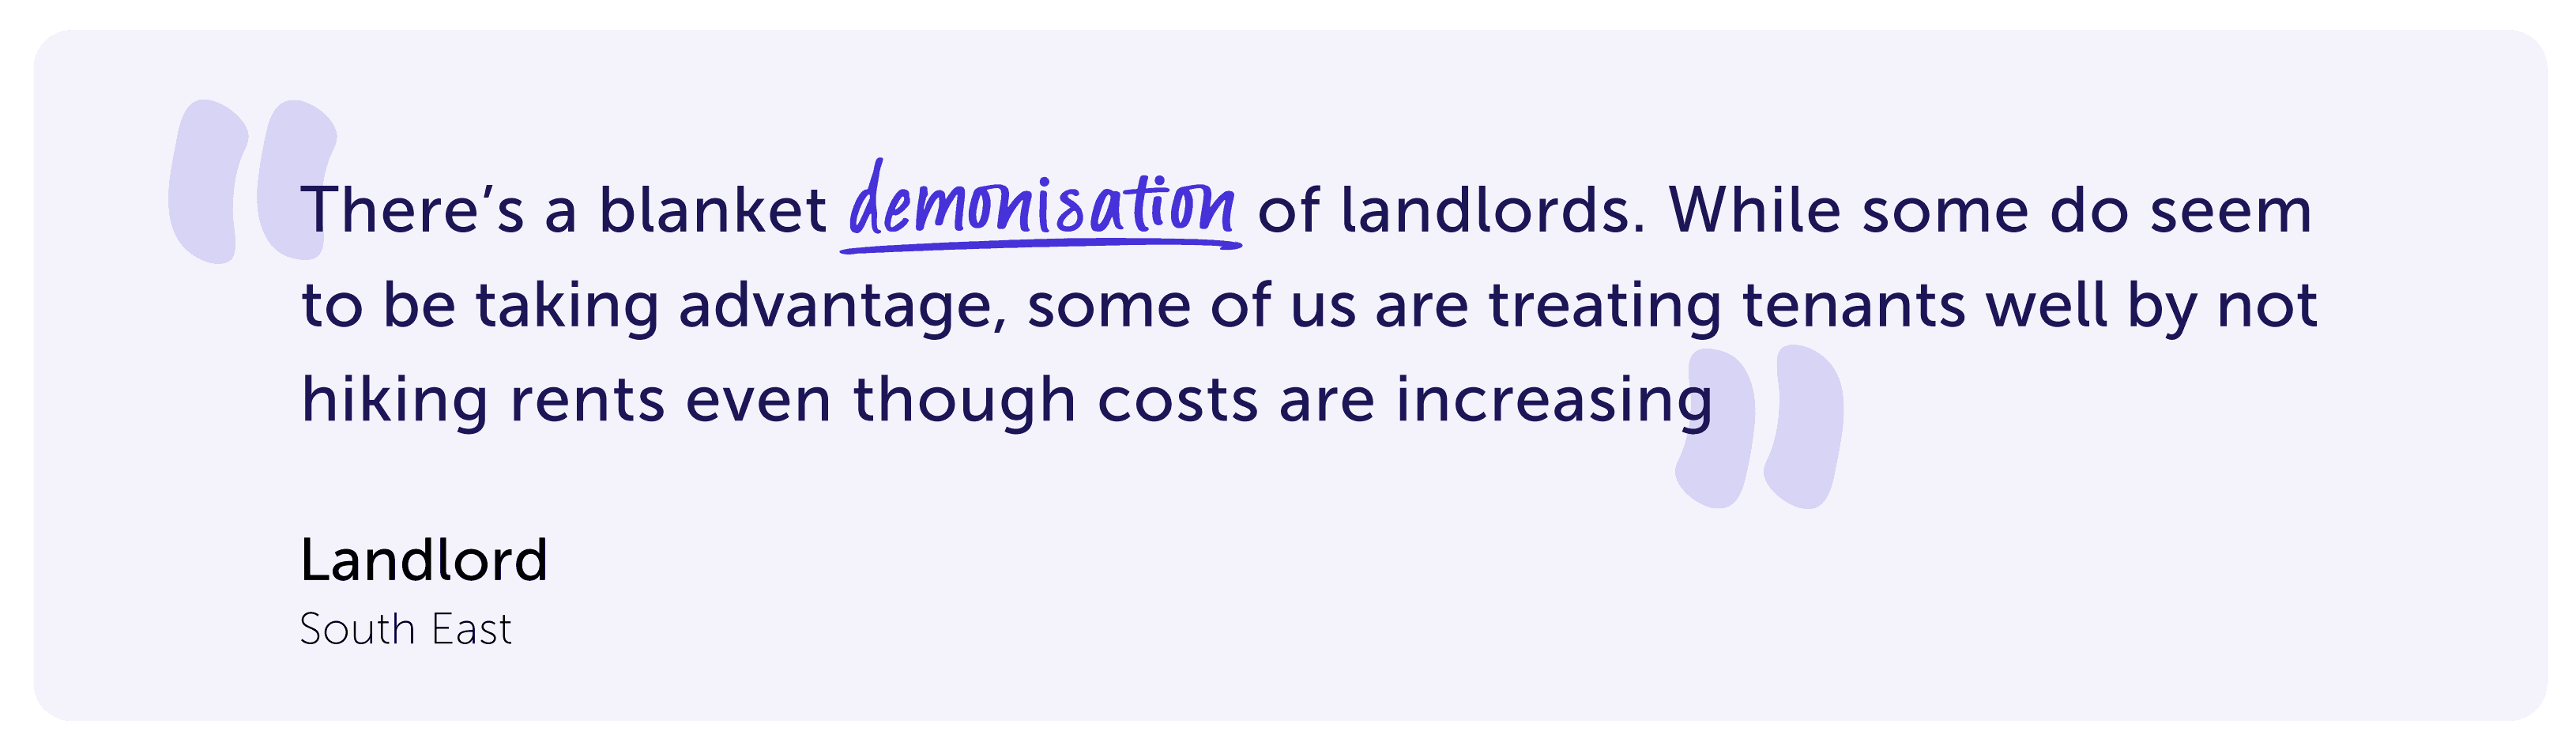 SouthEastLandlord_QuoteInfographic.png